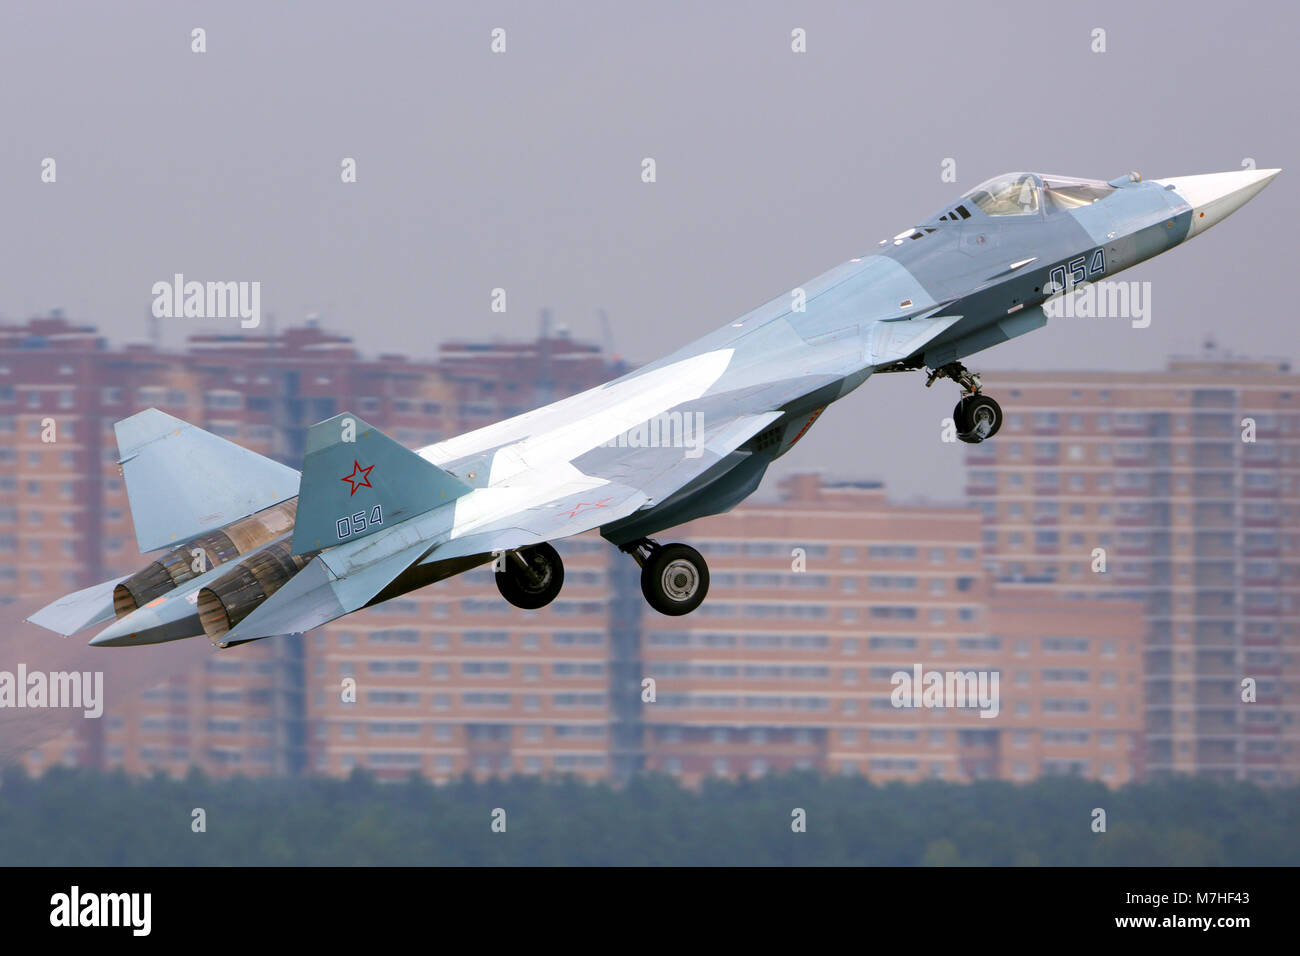 T-50 PAK-FA fifth generation jet fighter of Russian Air Force. Stock Photo